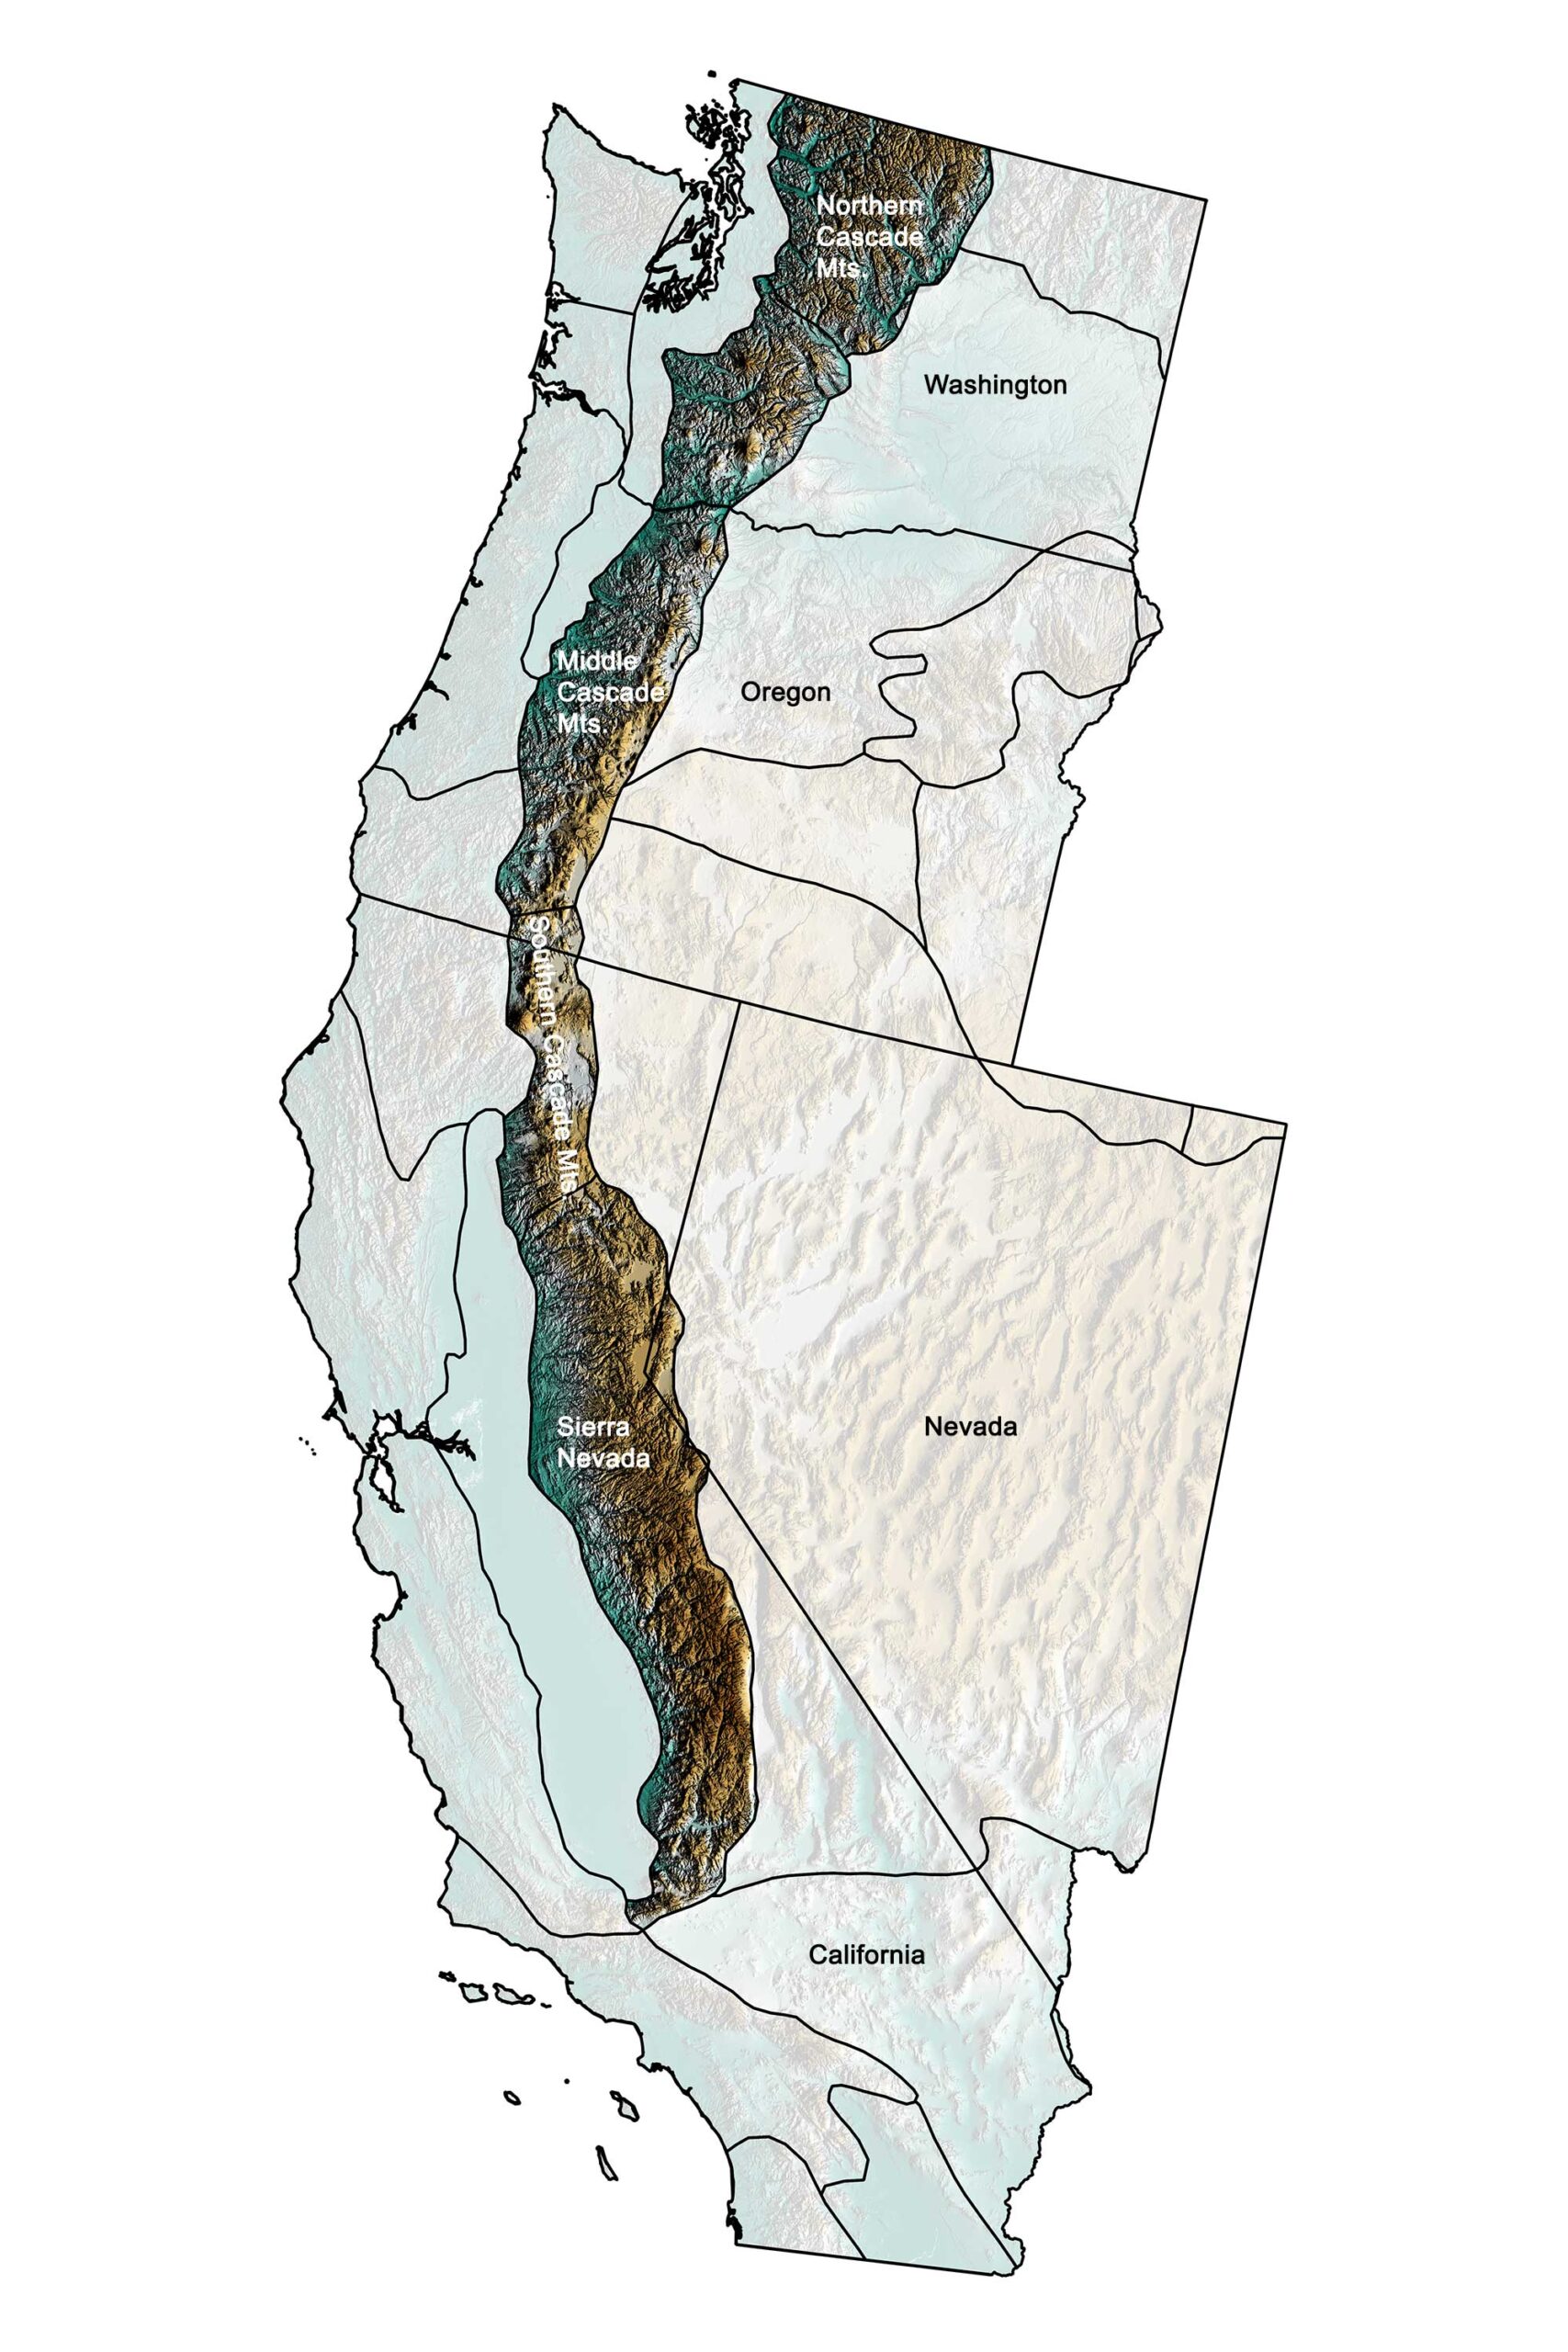 Topographic map of the Cascade-Sierra Mountains region of the western United States.